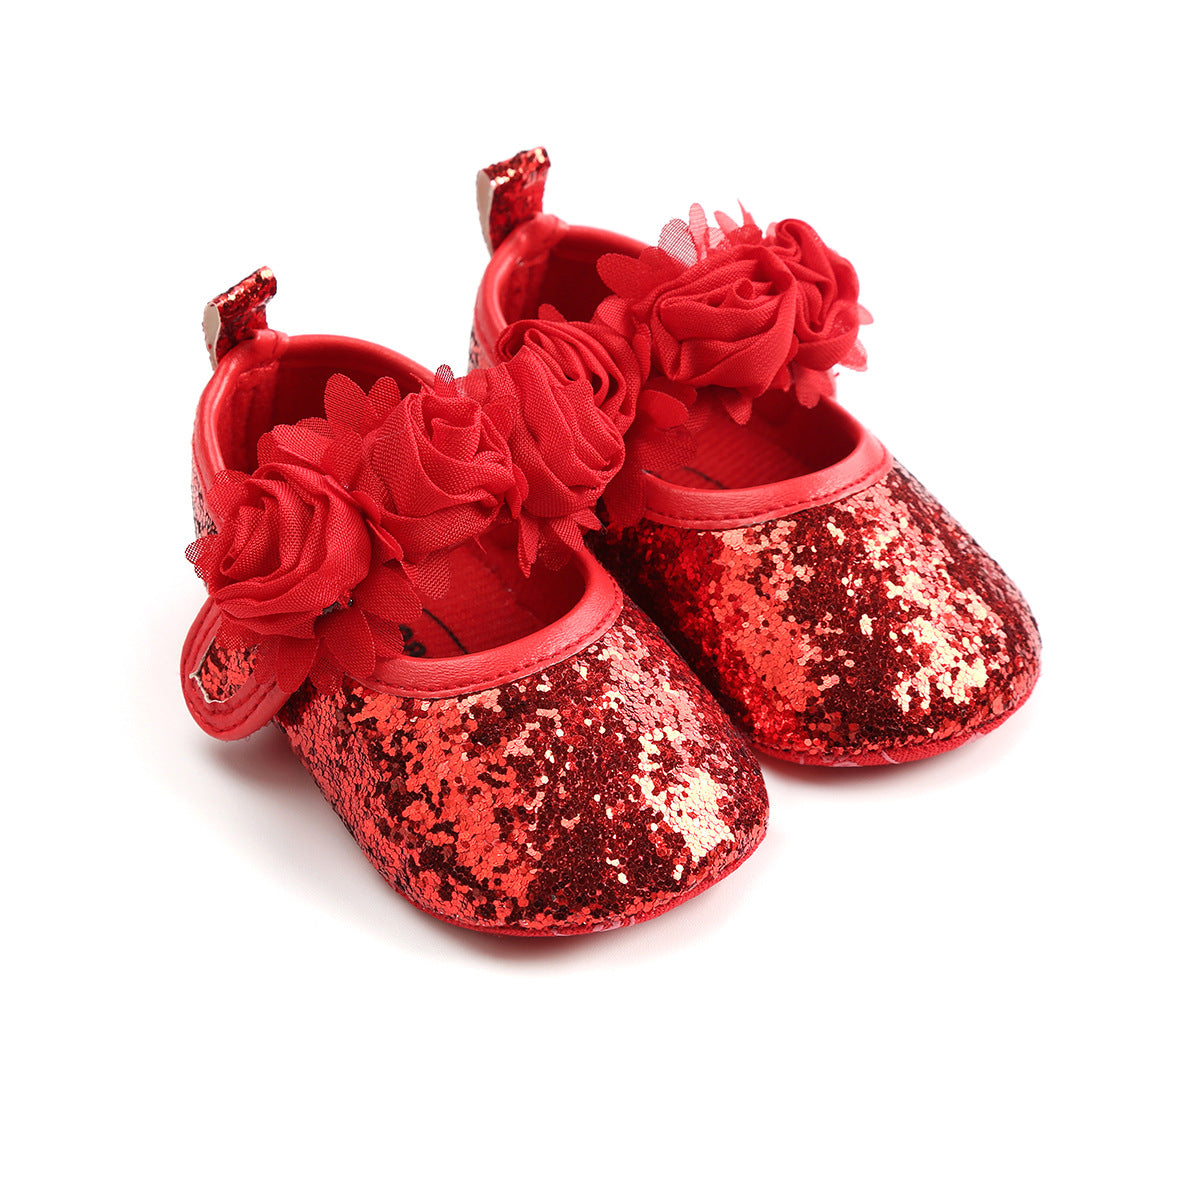 Rose baby girl shoes